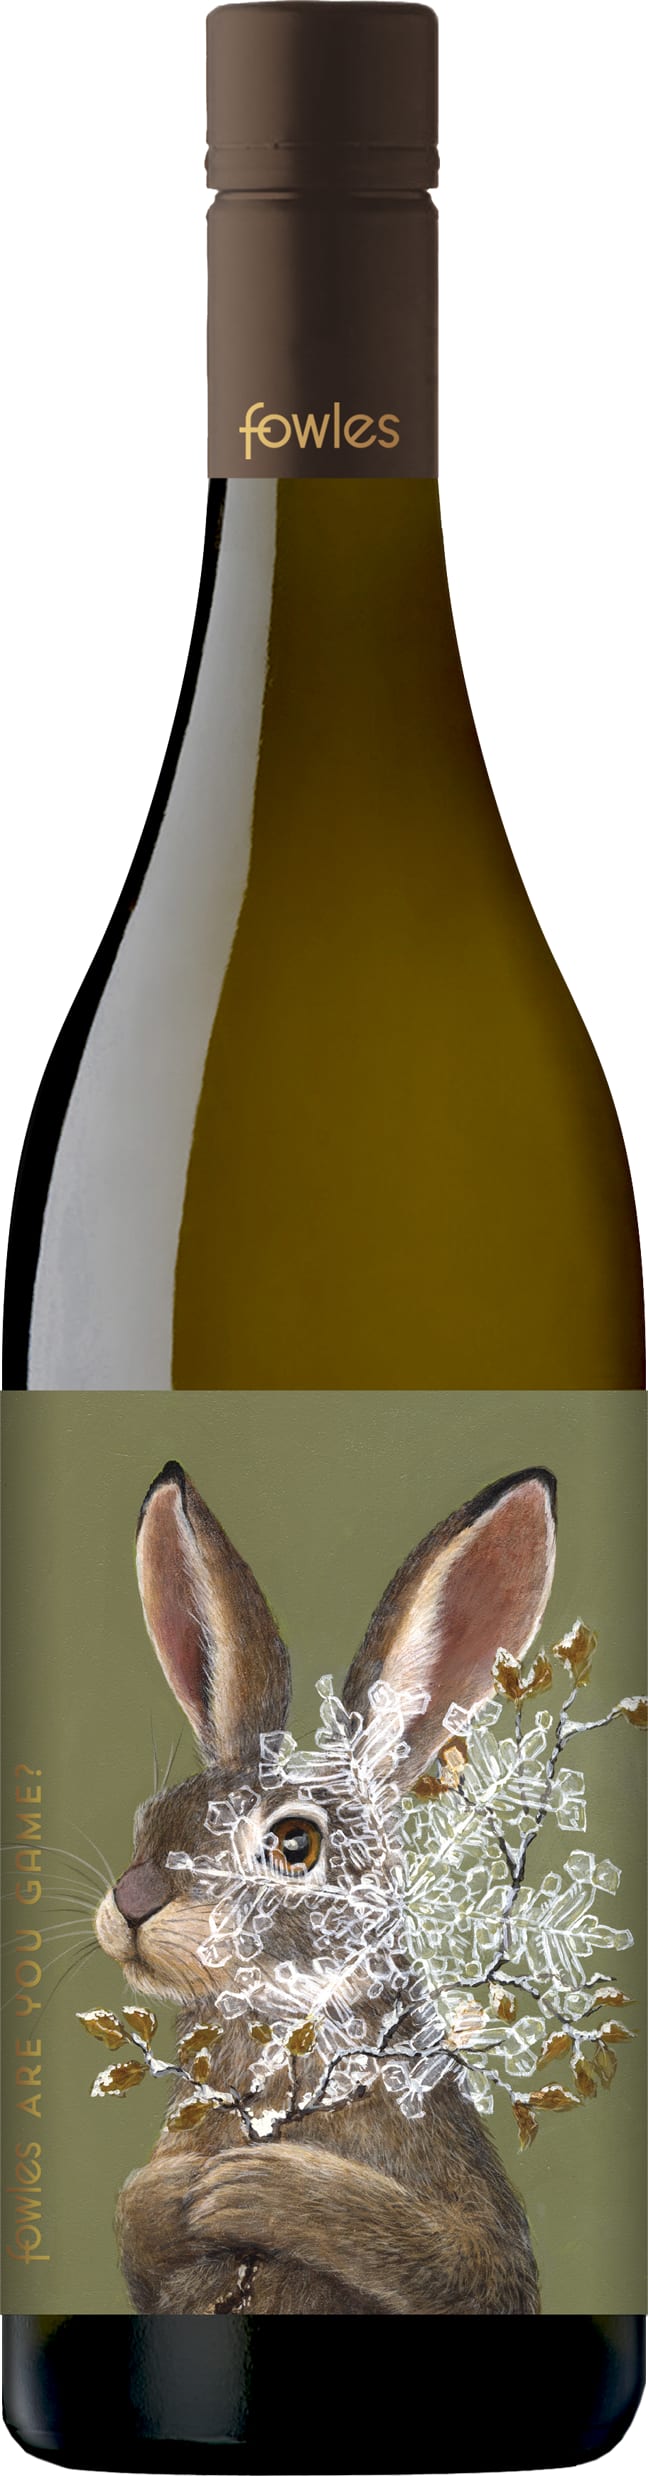 Are You Game? Chardonnay 2020, Fowles Wine